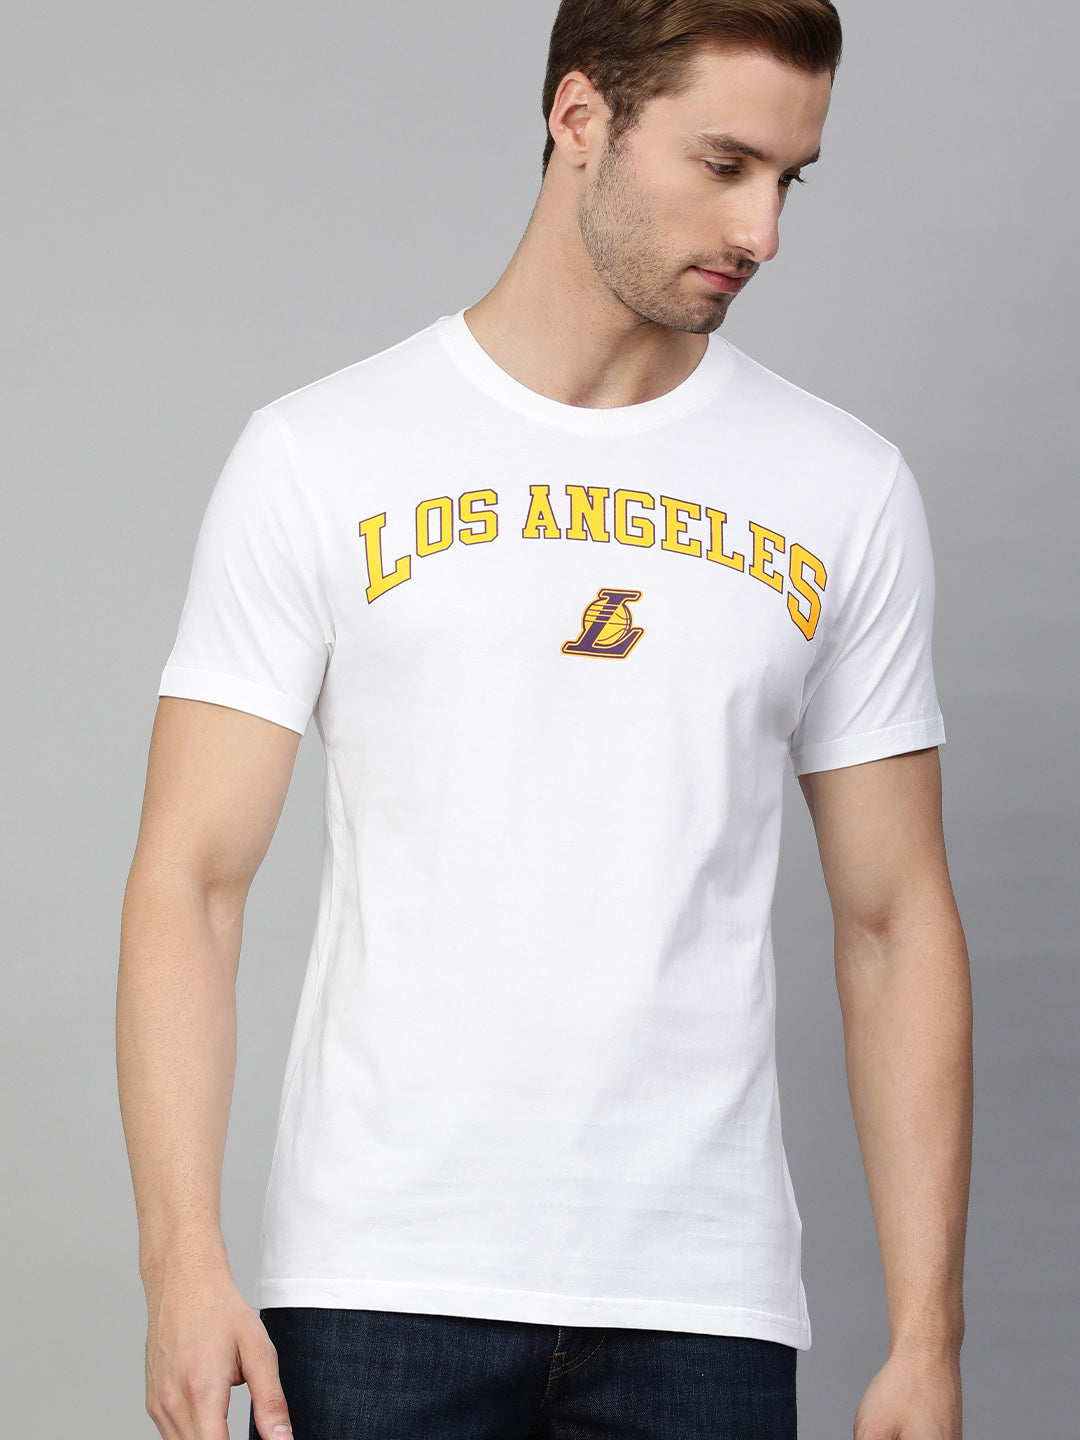 Buy Lakers T Shirt Online In India -  India